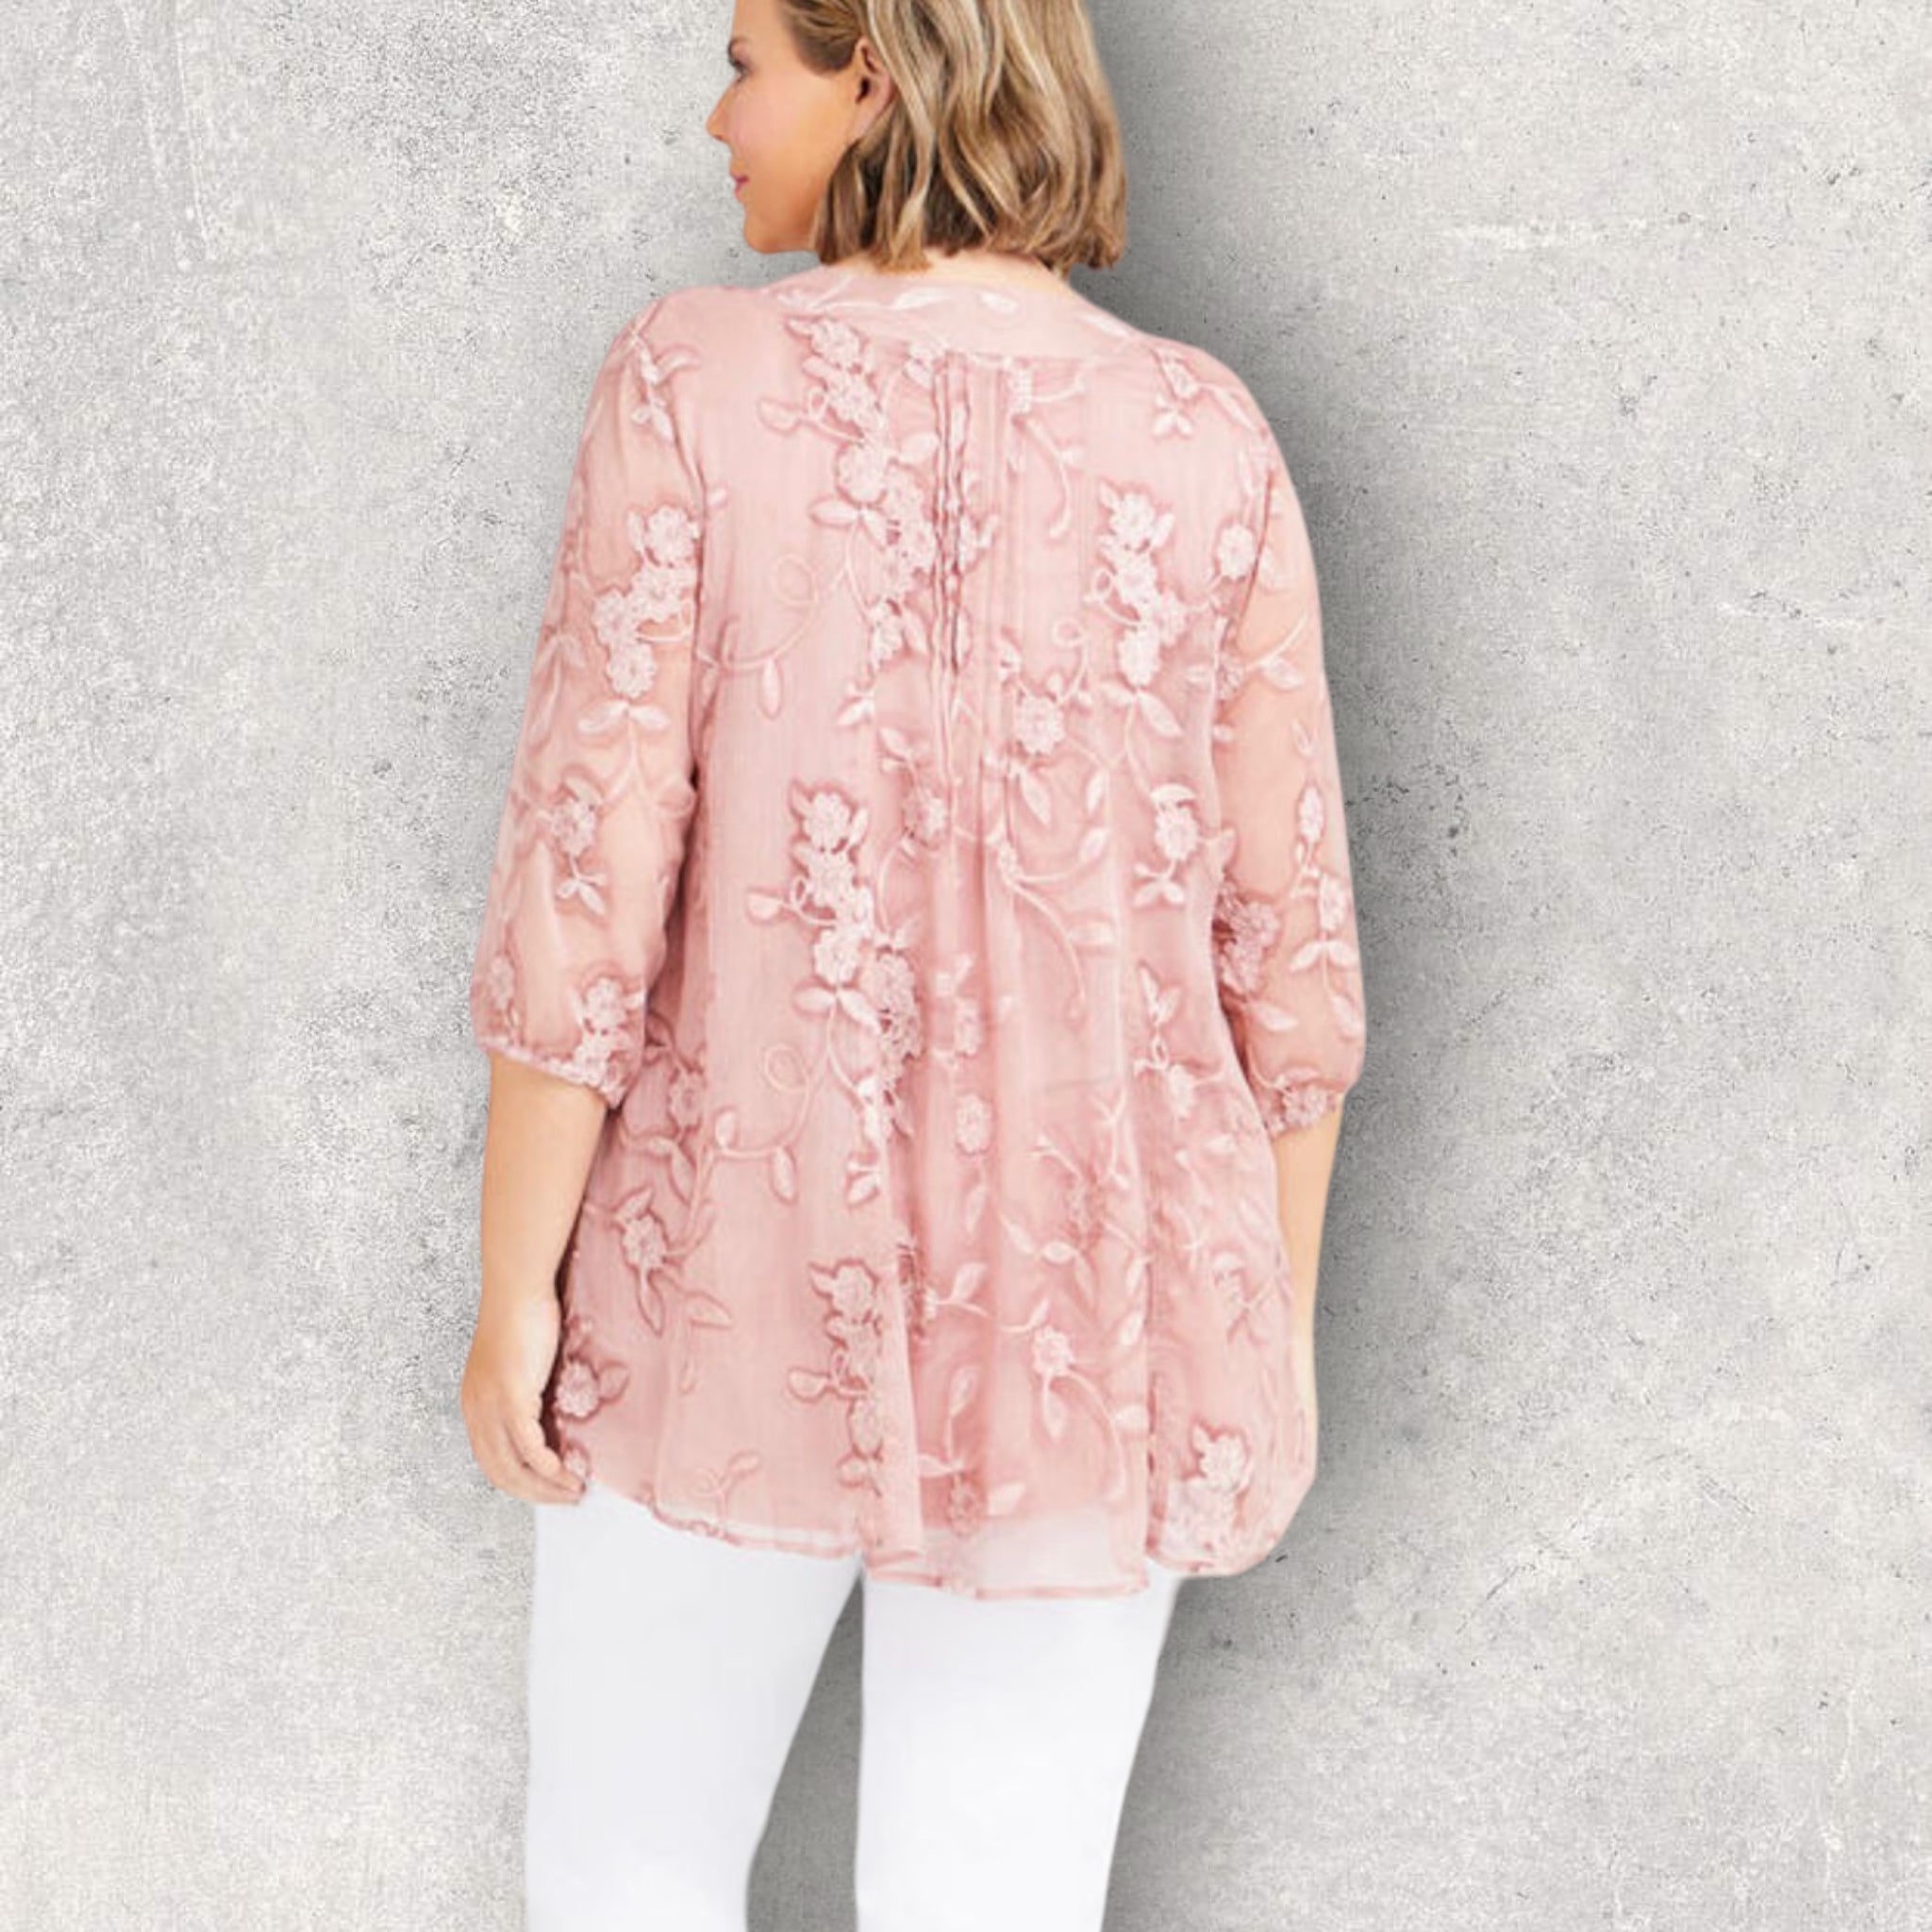 BNWT TAKING SHAPE Sunray Embroidered Tunic Blouse - Size 24